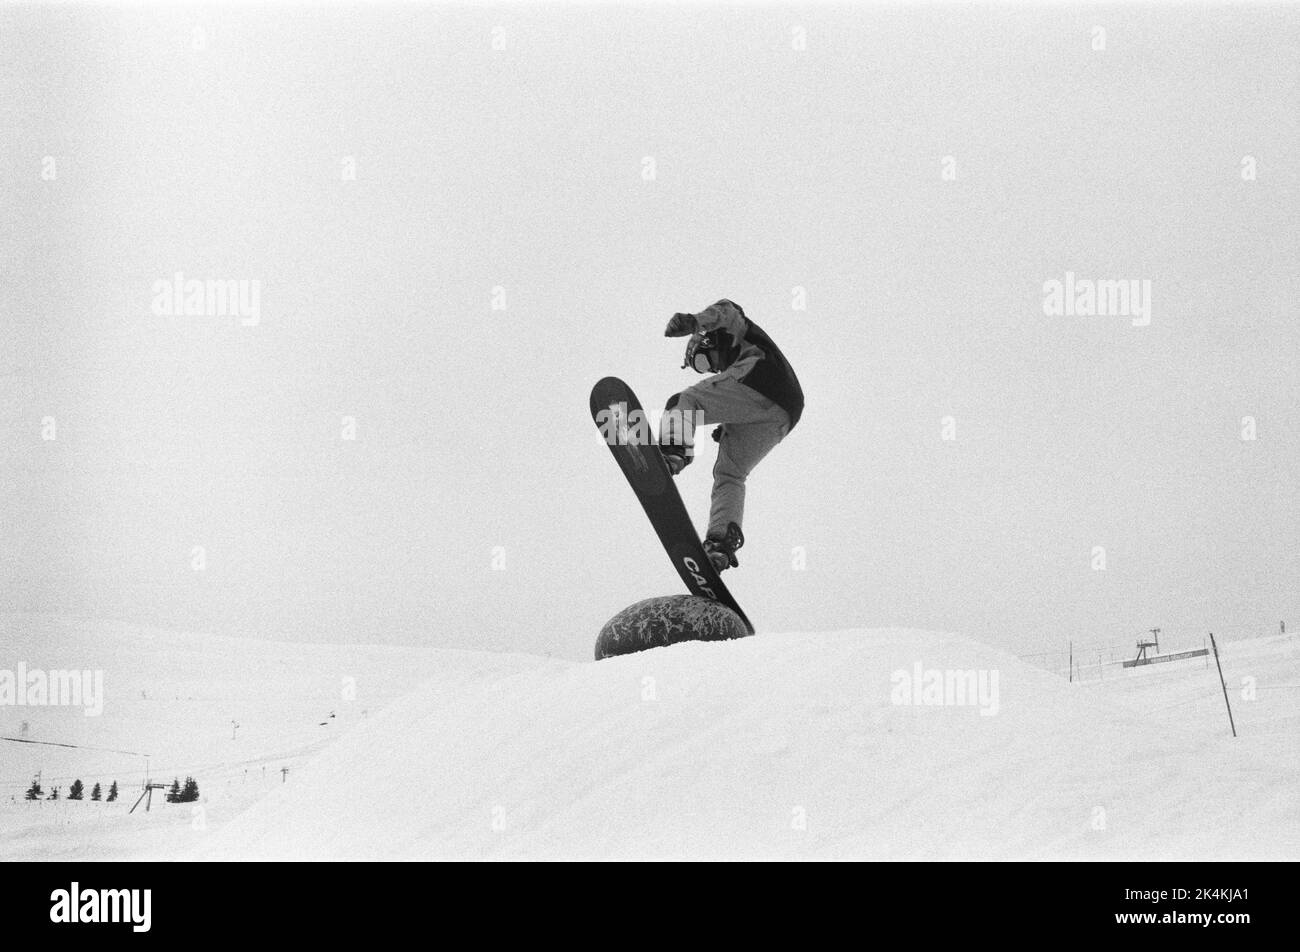 Snowboarder at Alpe D'Huez ski resort in the French Alps. Stock Photo